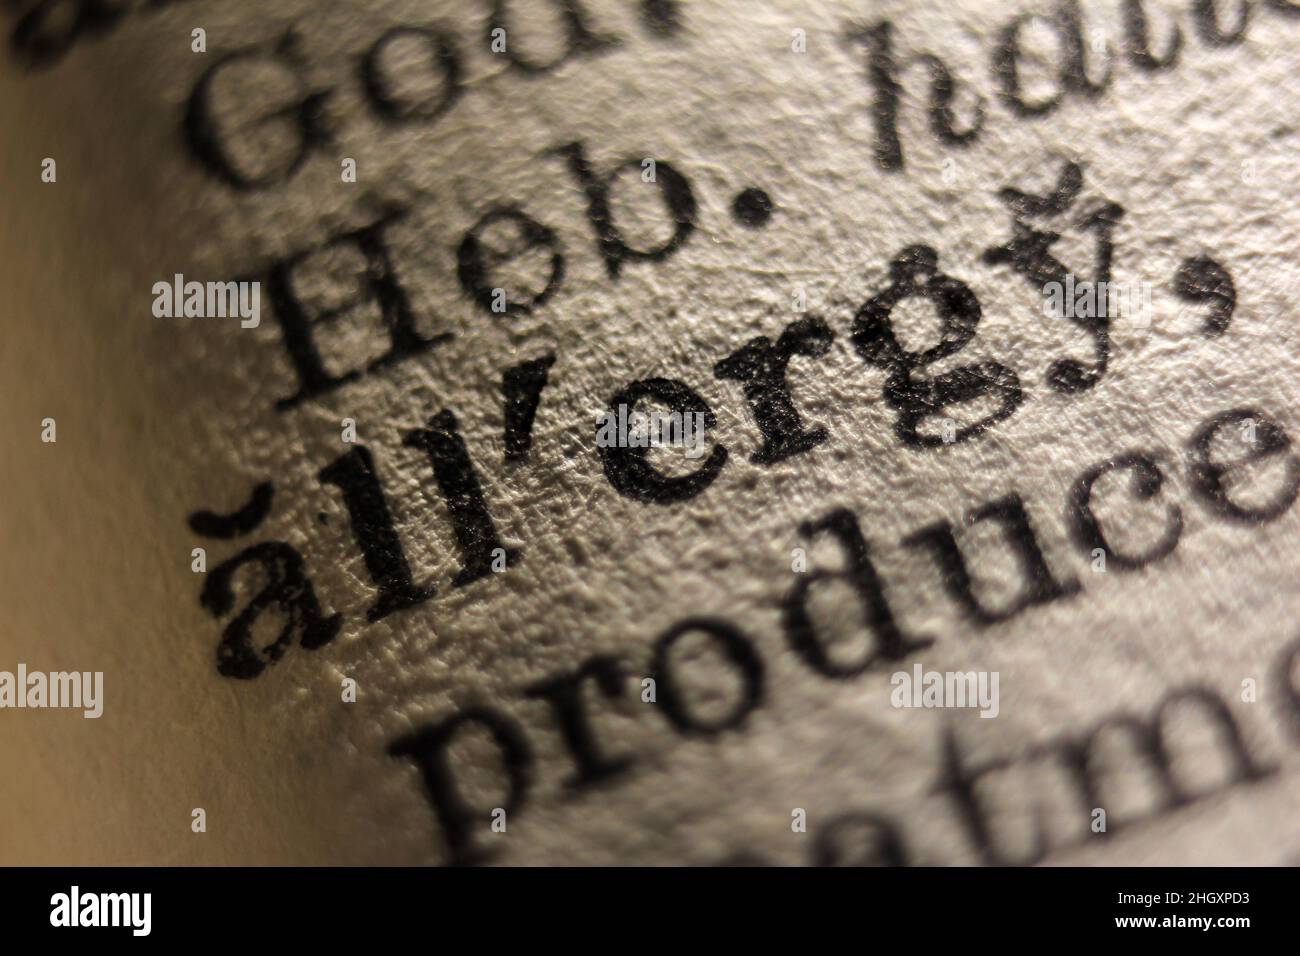 Word 'allergy' printed on dictionary page, macro close-up Stock Photo